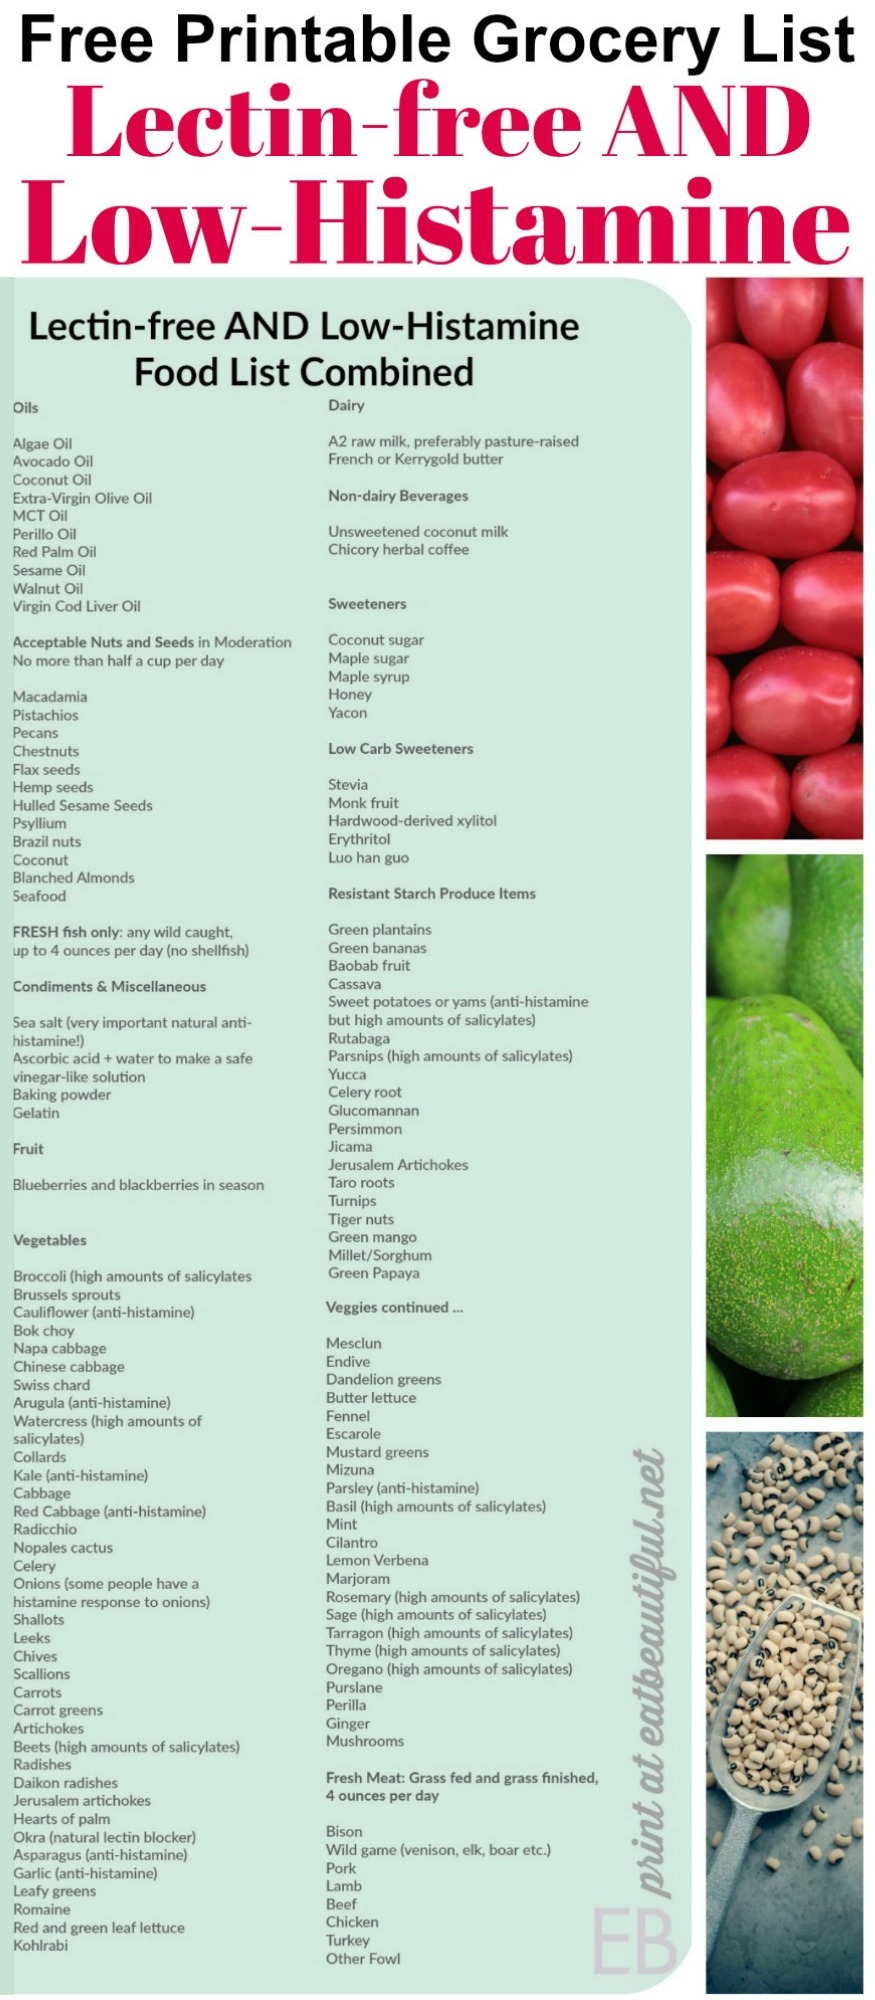 Low Histamine AND Lectin free Combined Food List Grocery List With 